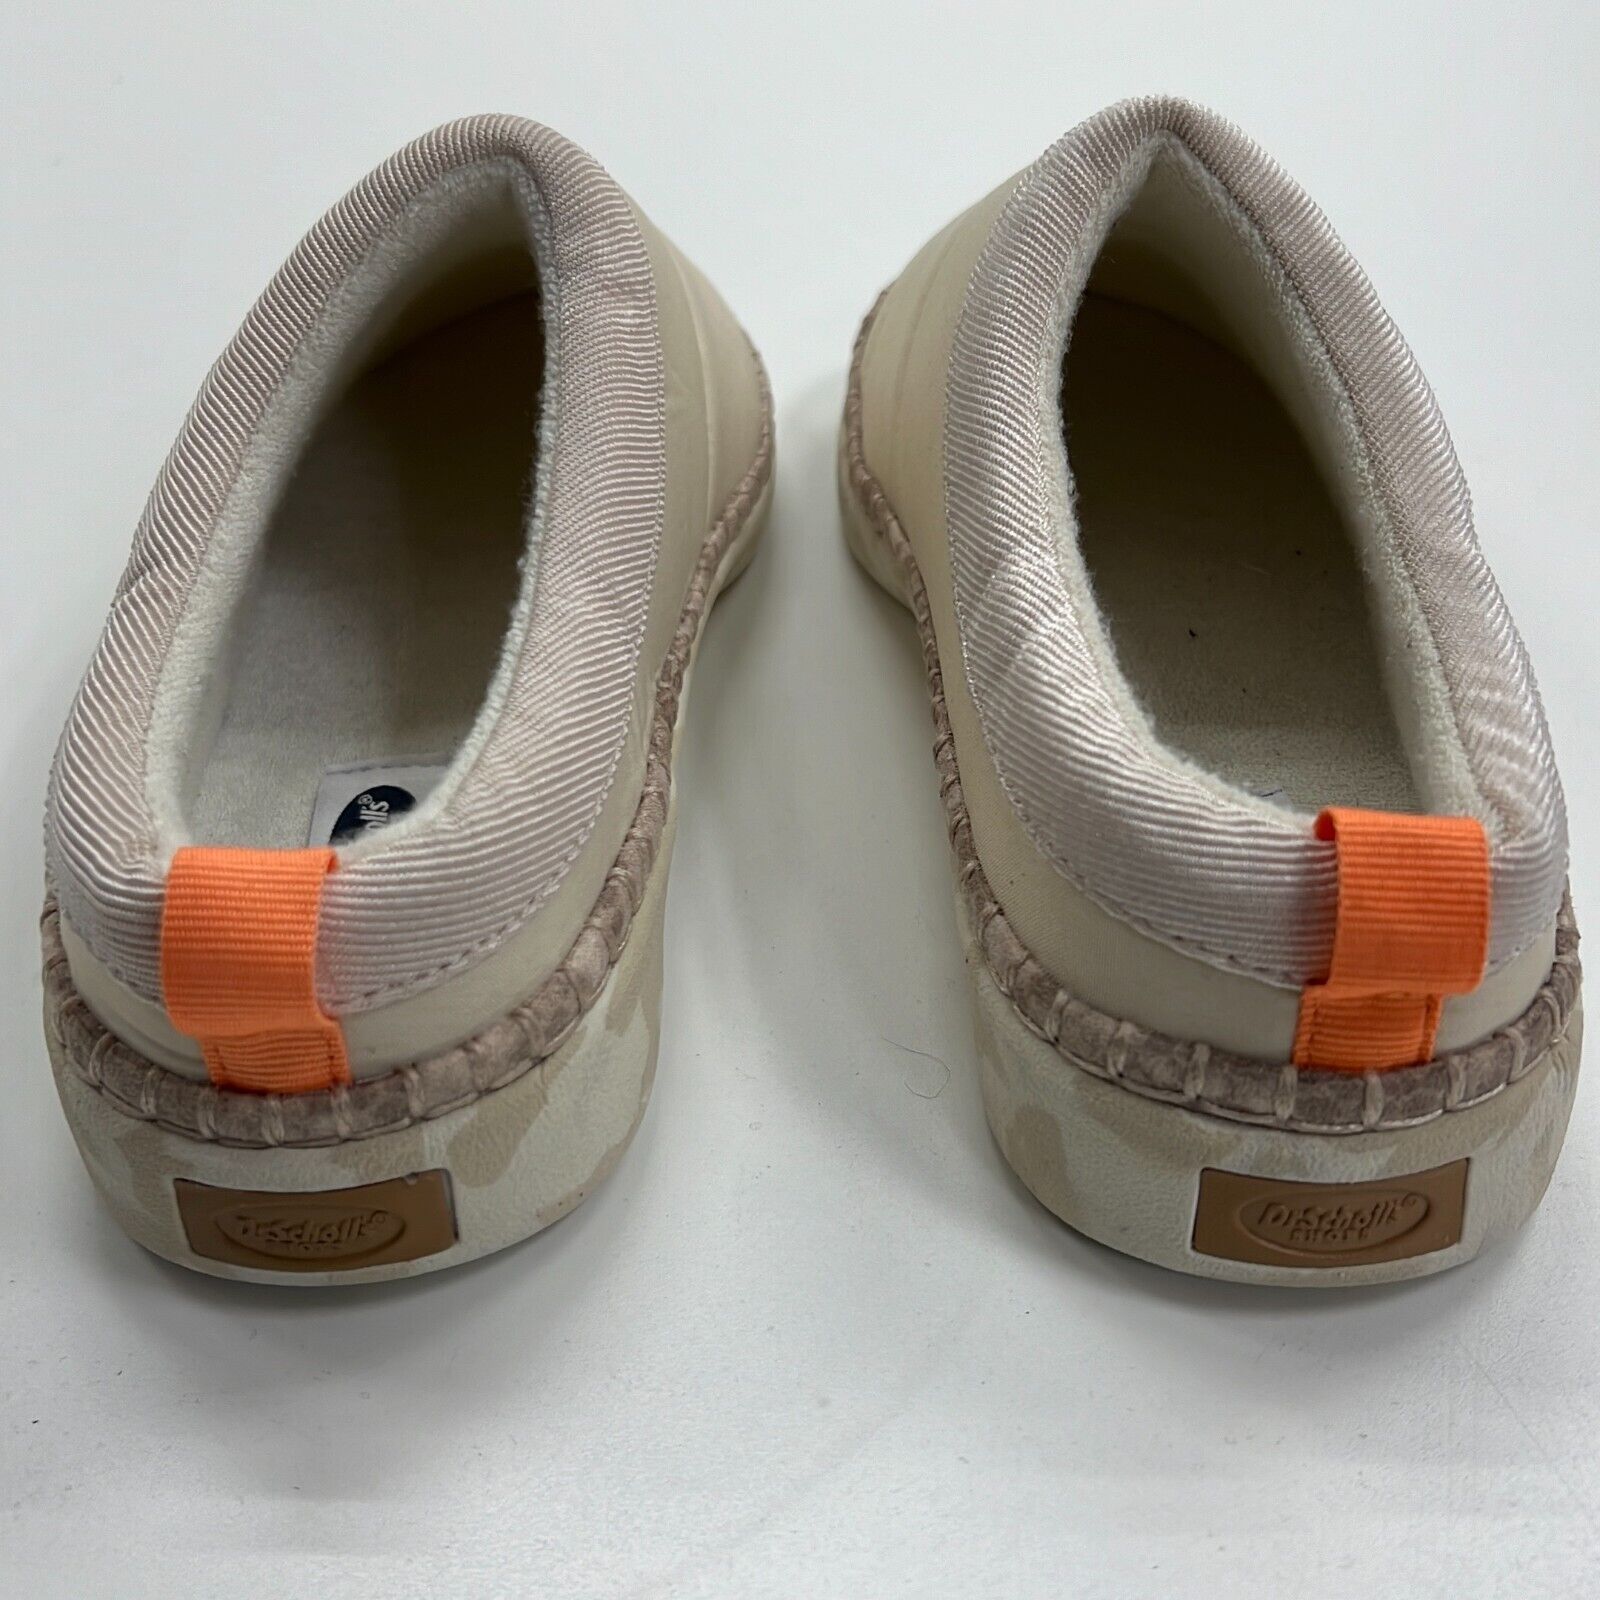 Dr. Scholl’s Women’s Cosy Vibes Beige Round Toe Casual Slip-On Shoes Size 6 M